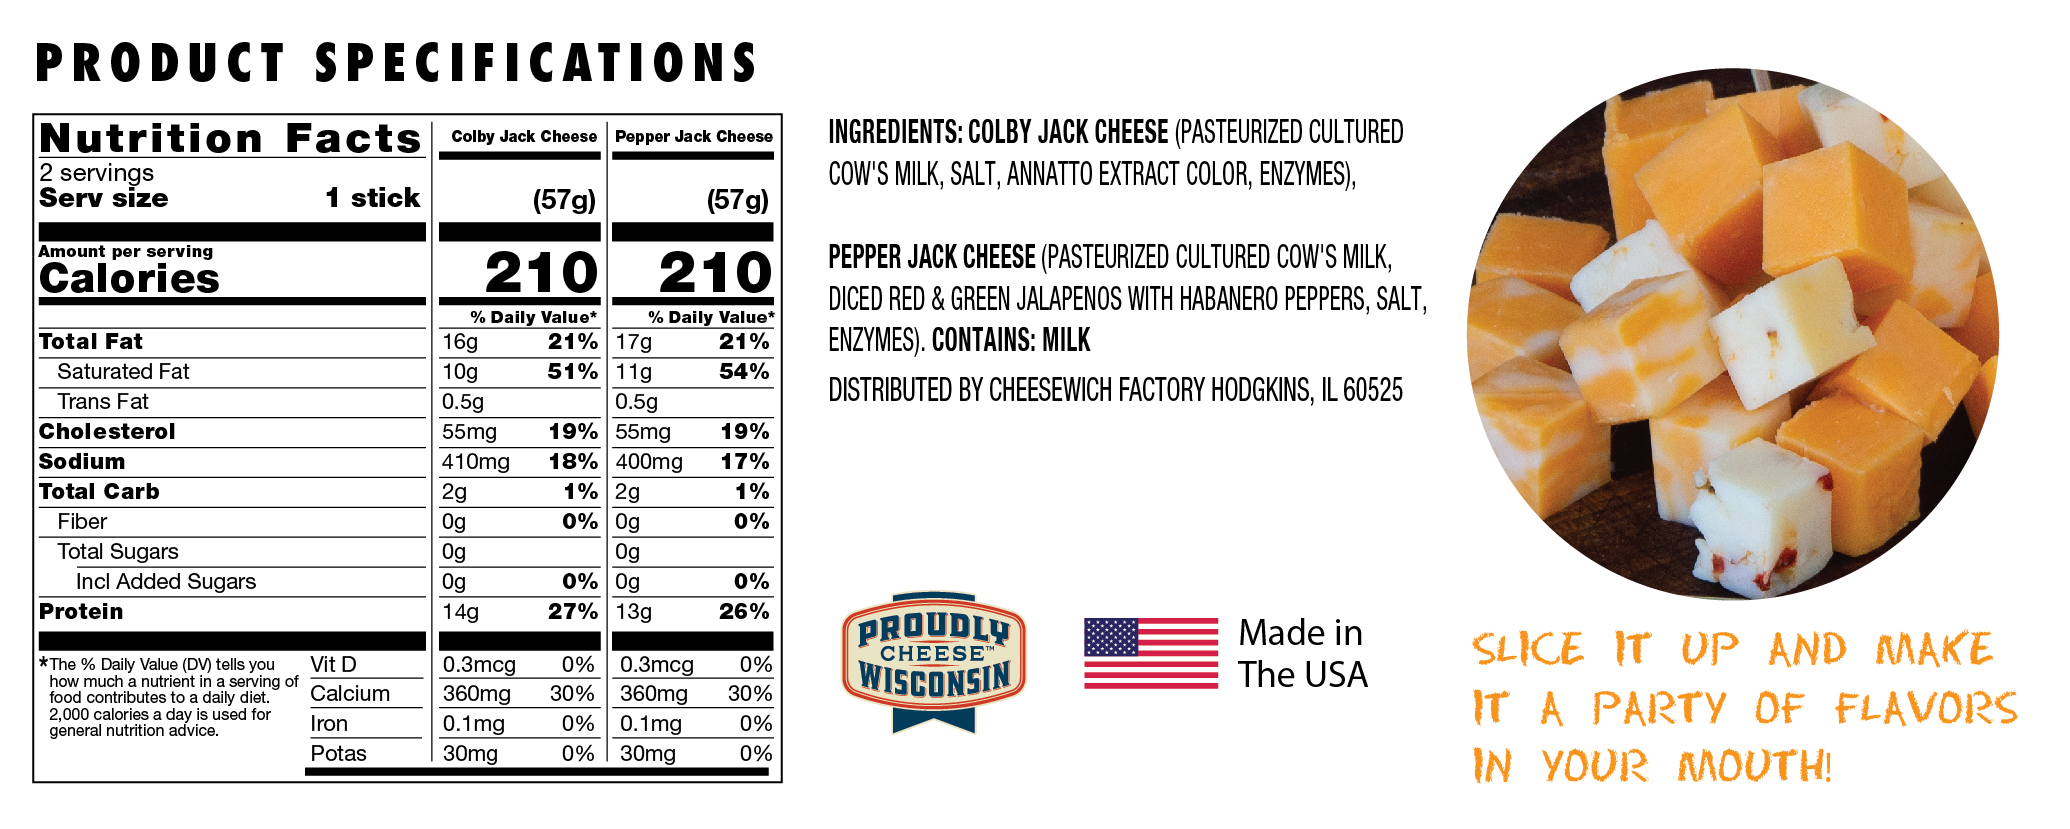 ingredients and nutrition info for each 2 oz block of cheese.